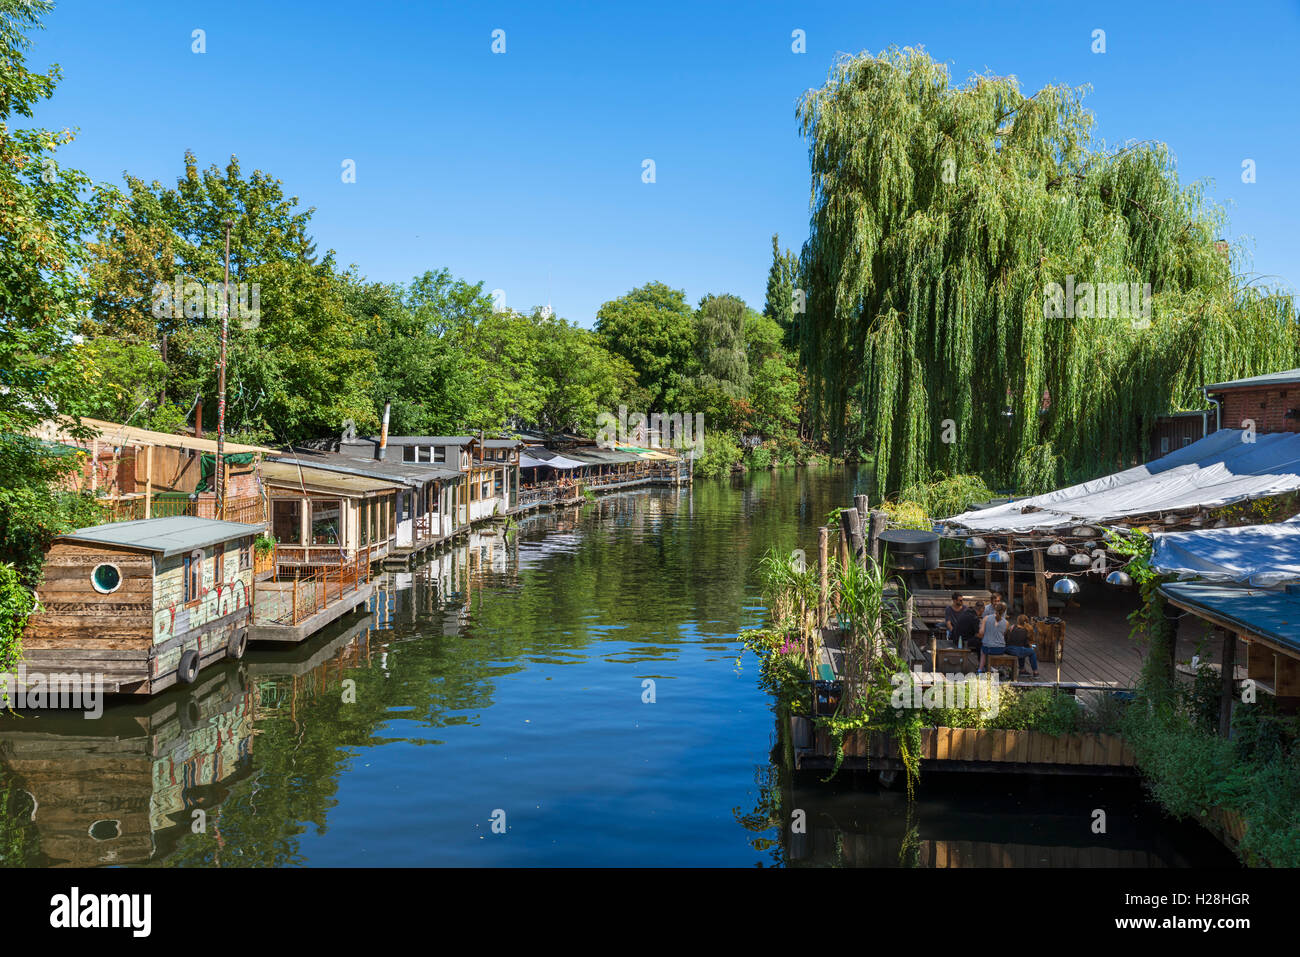 The Flutgraben Canal with  Club der Visionare to right and Freischwimmer restaurant to left, Kreuzberg, Berlin, Germany Stock Photo